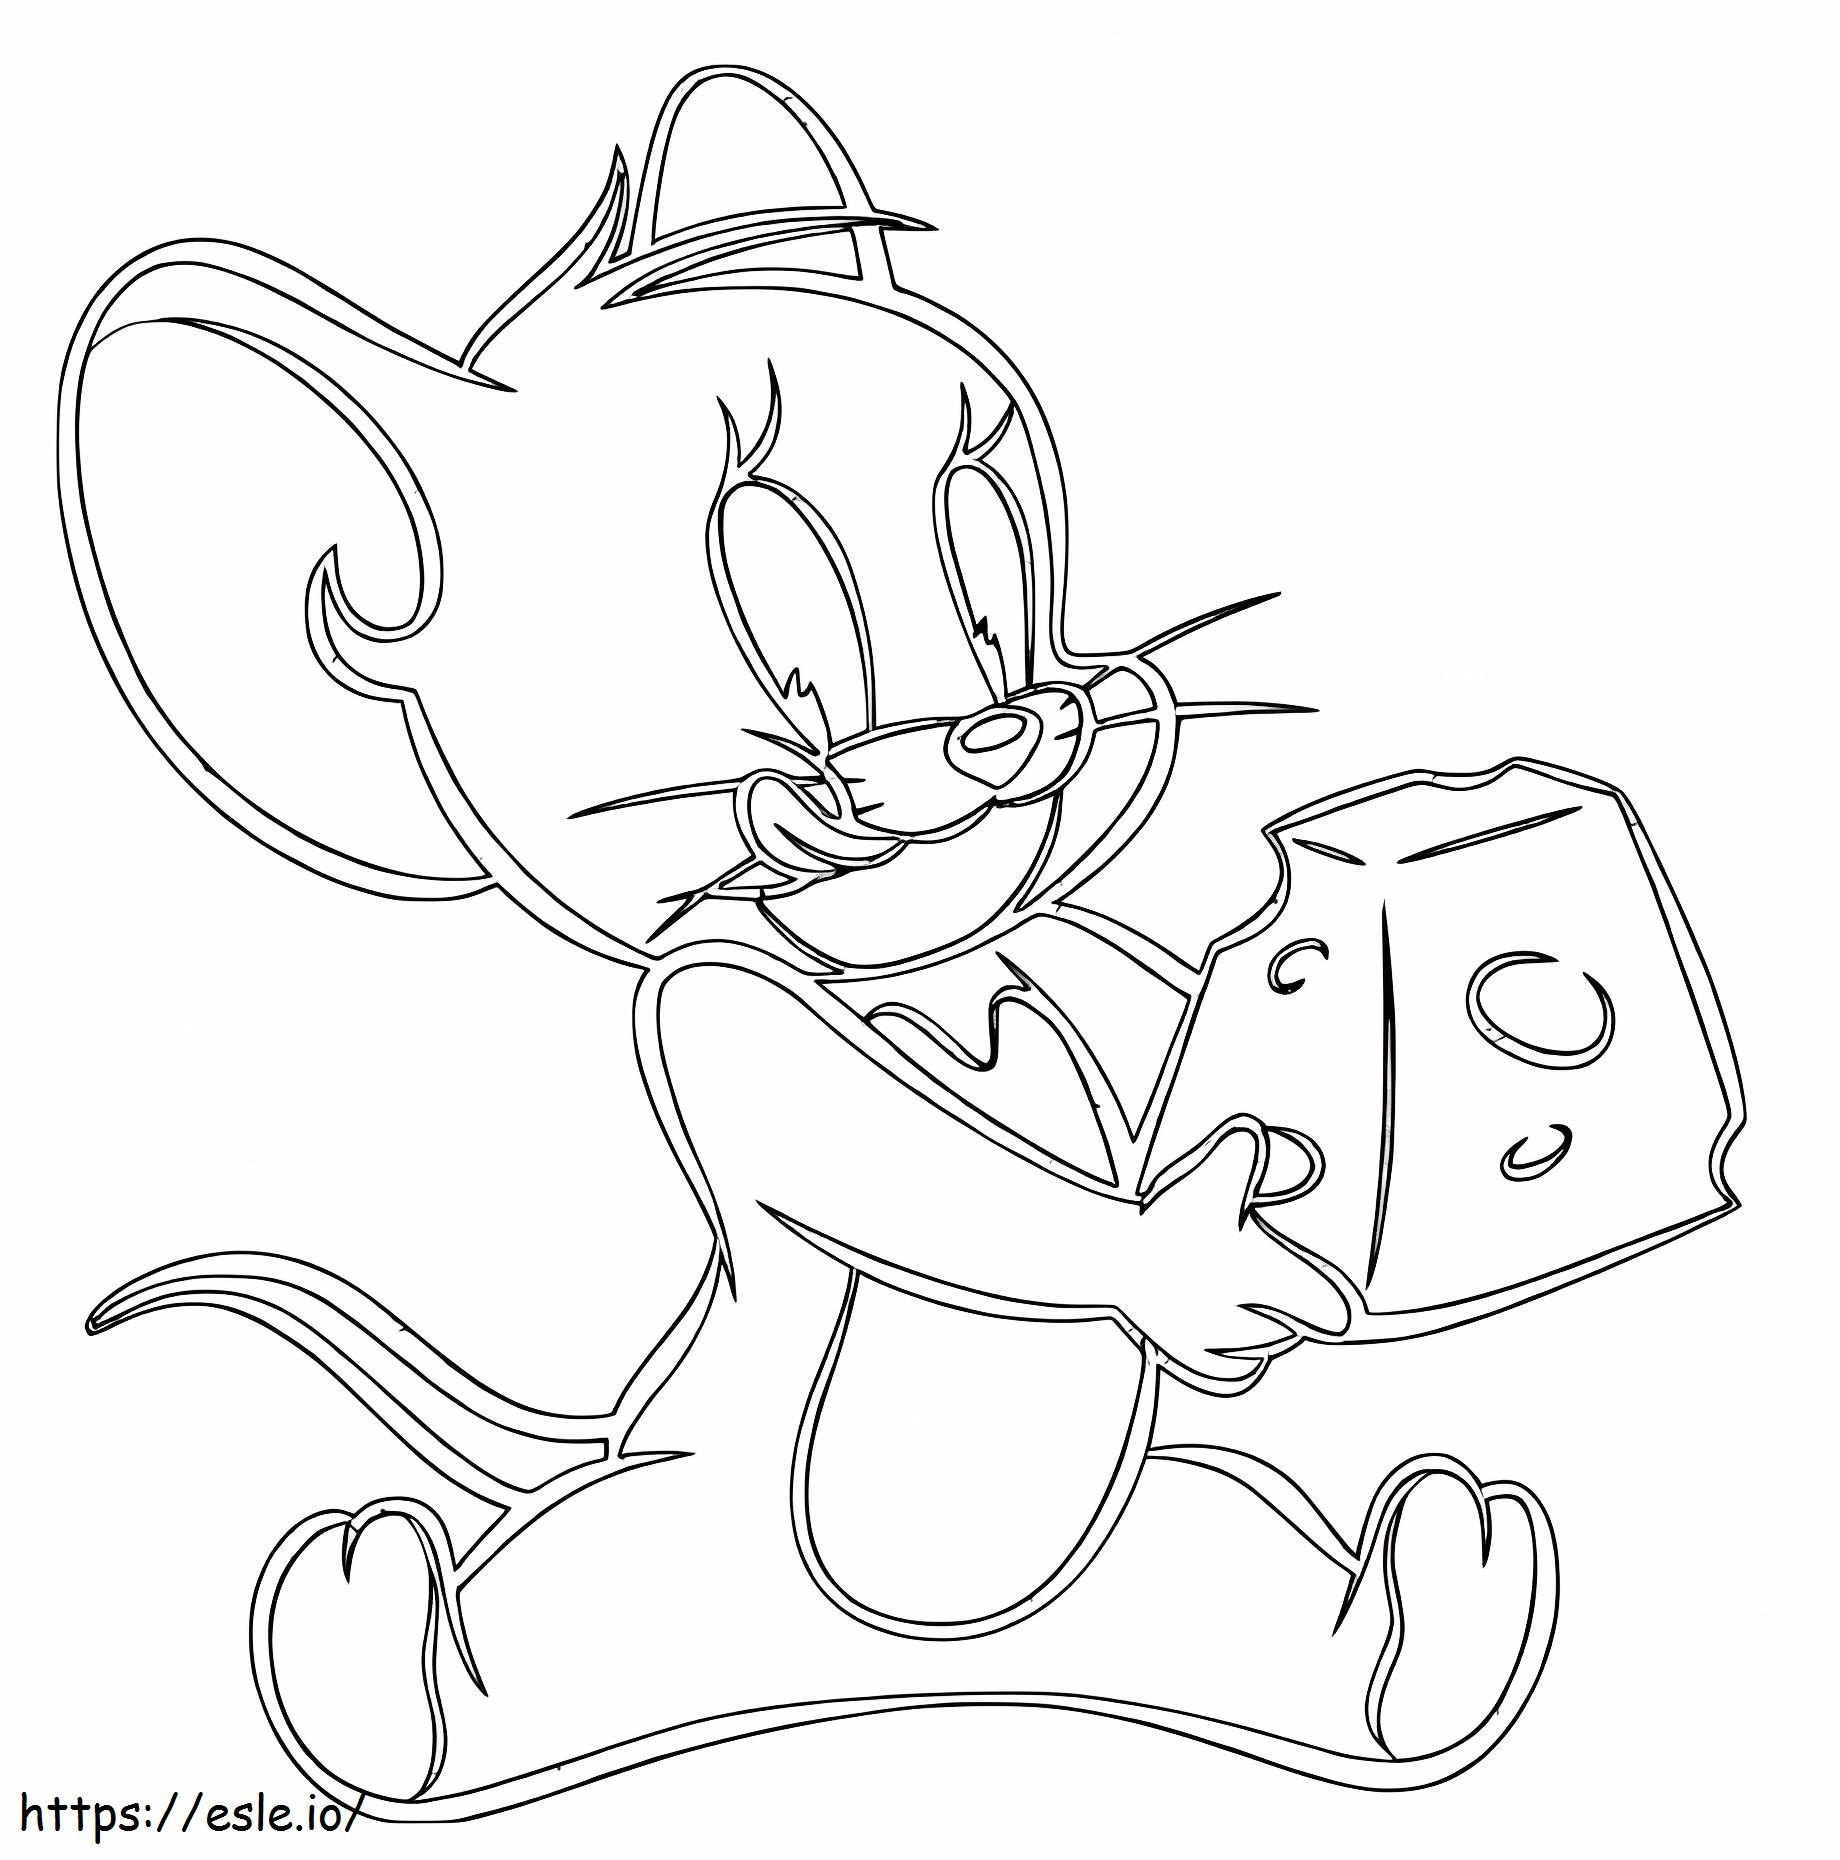 1532399681 Jerry With Cheese A4 coloring page